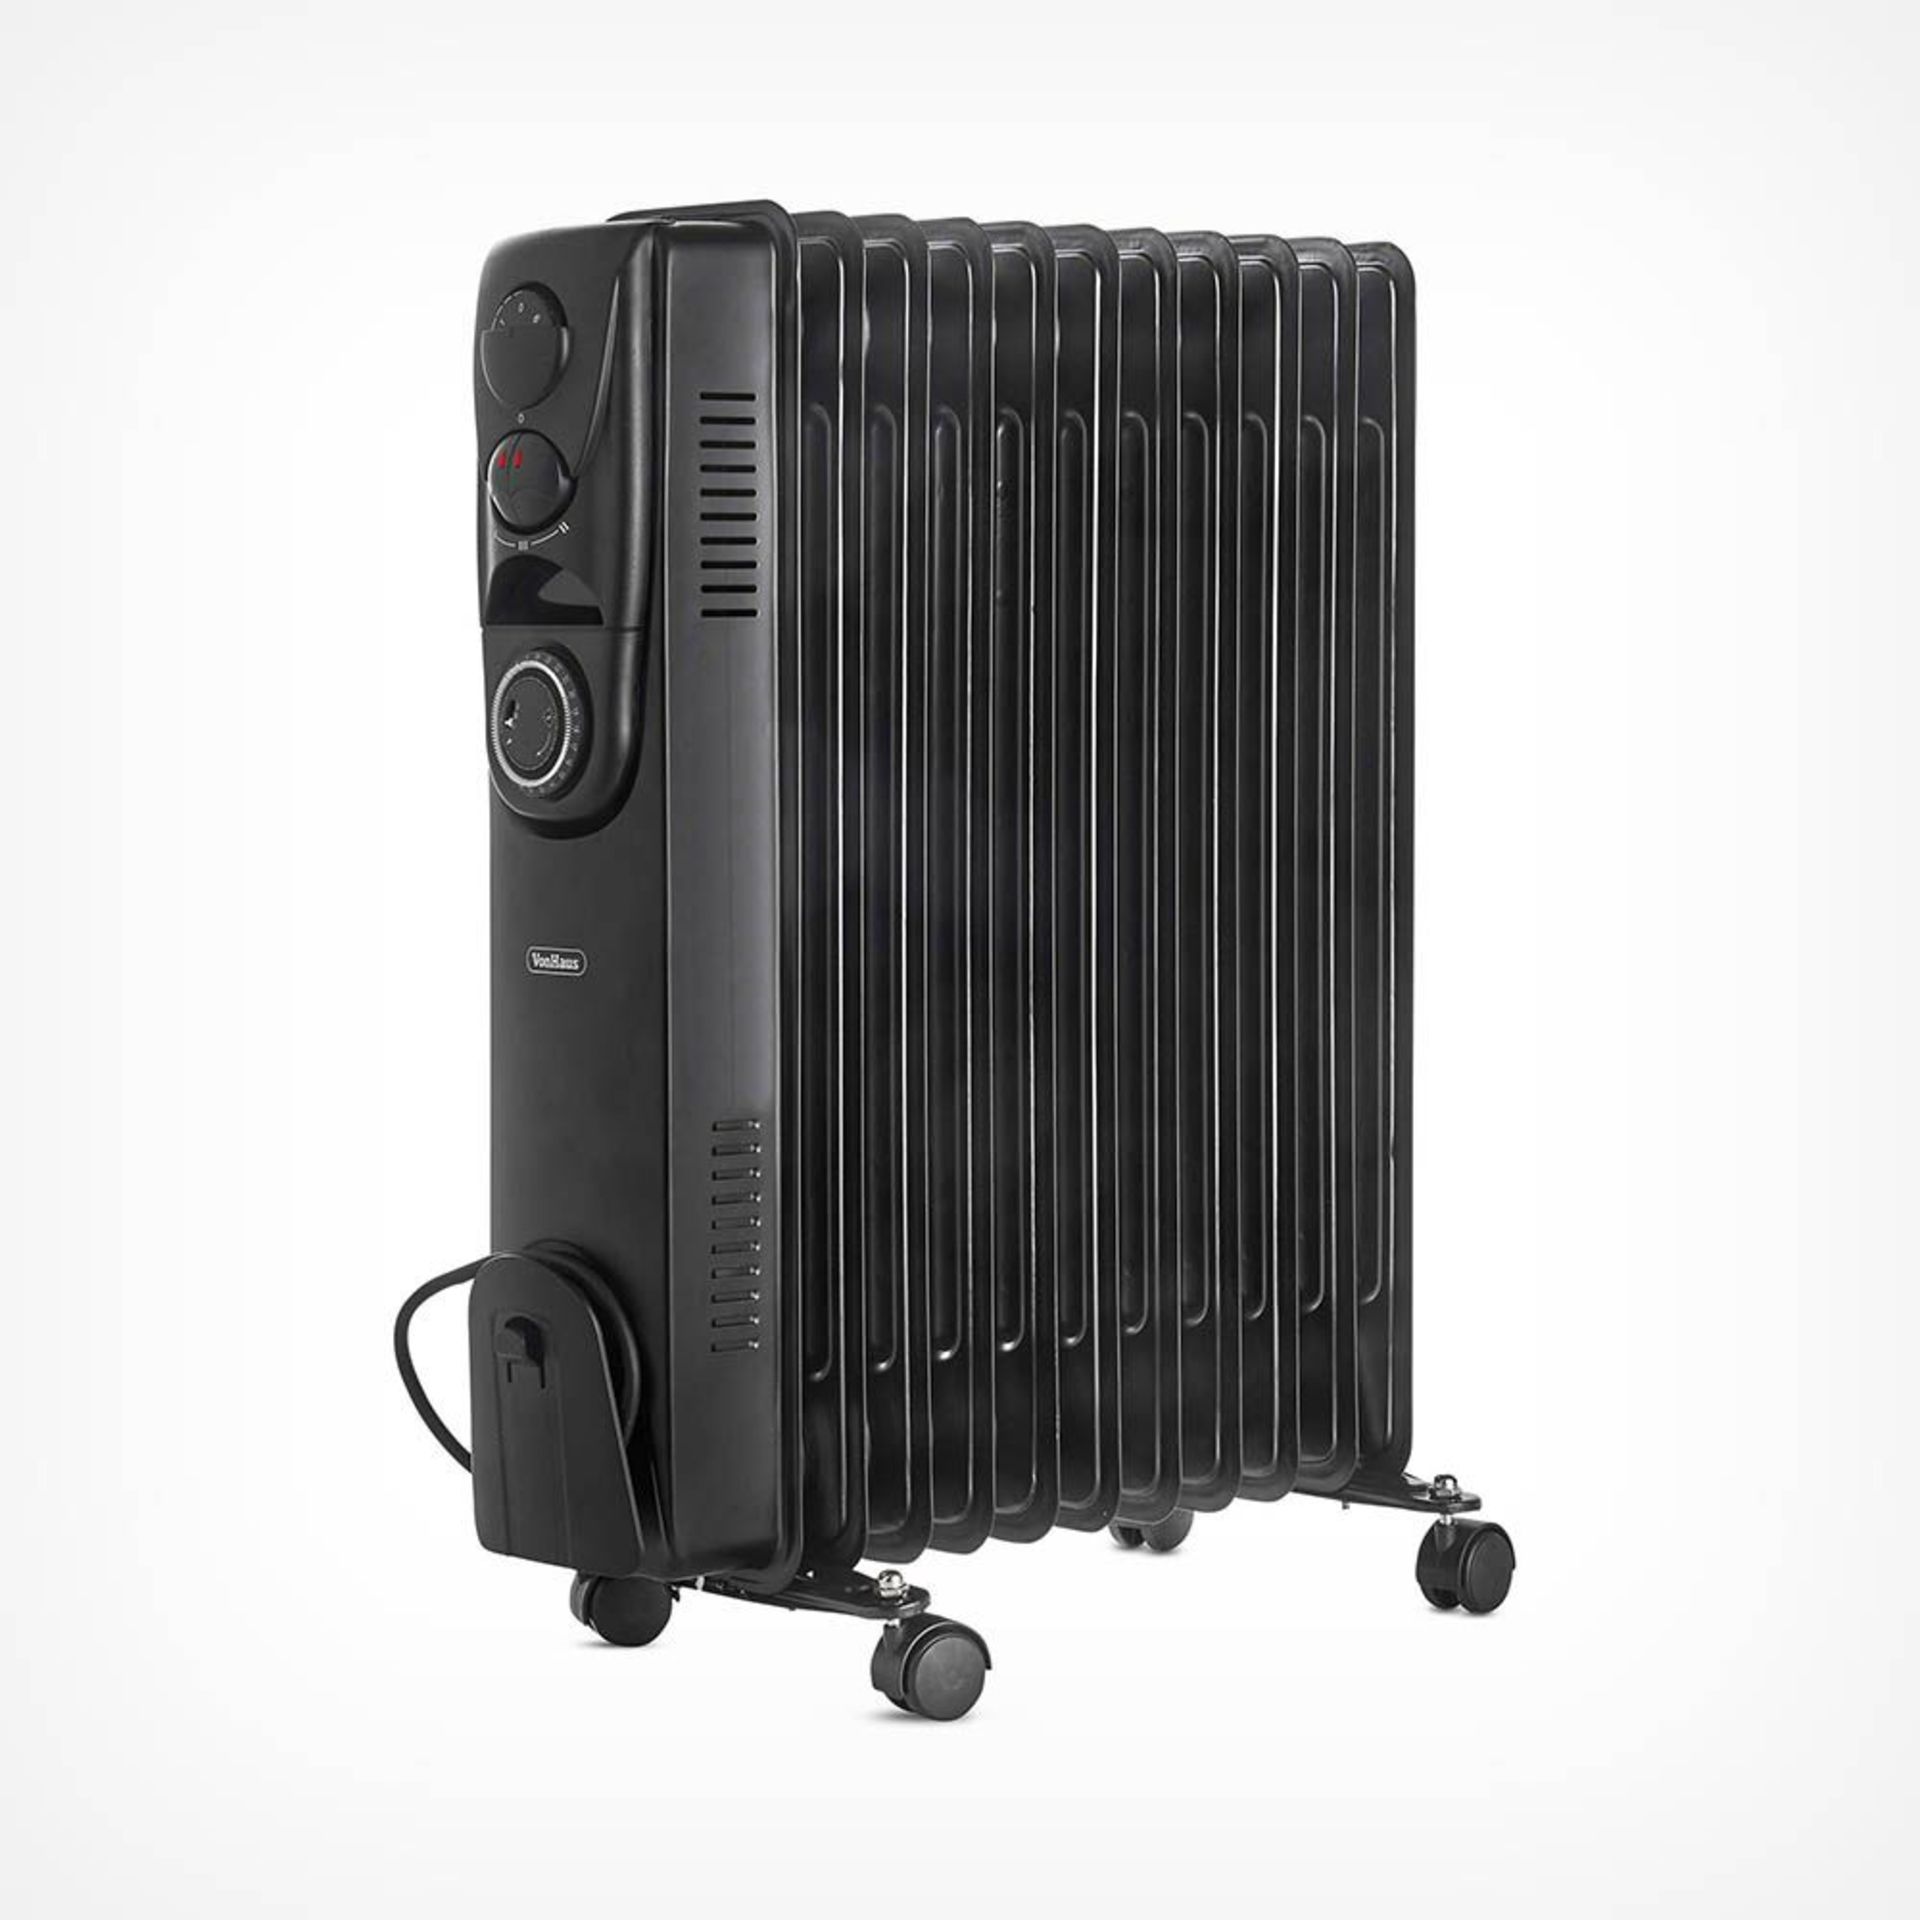 11 Fin 2500W Oil Filled Radiator - Black 2500W radiator with 11 oil-filled fins for heating mid to